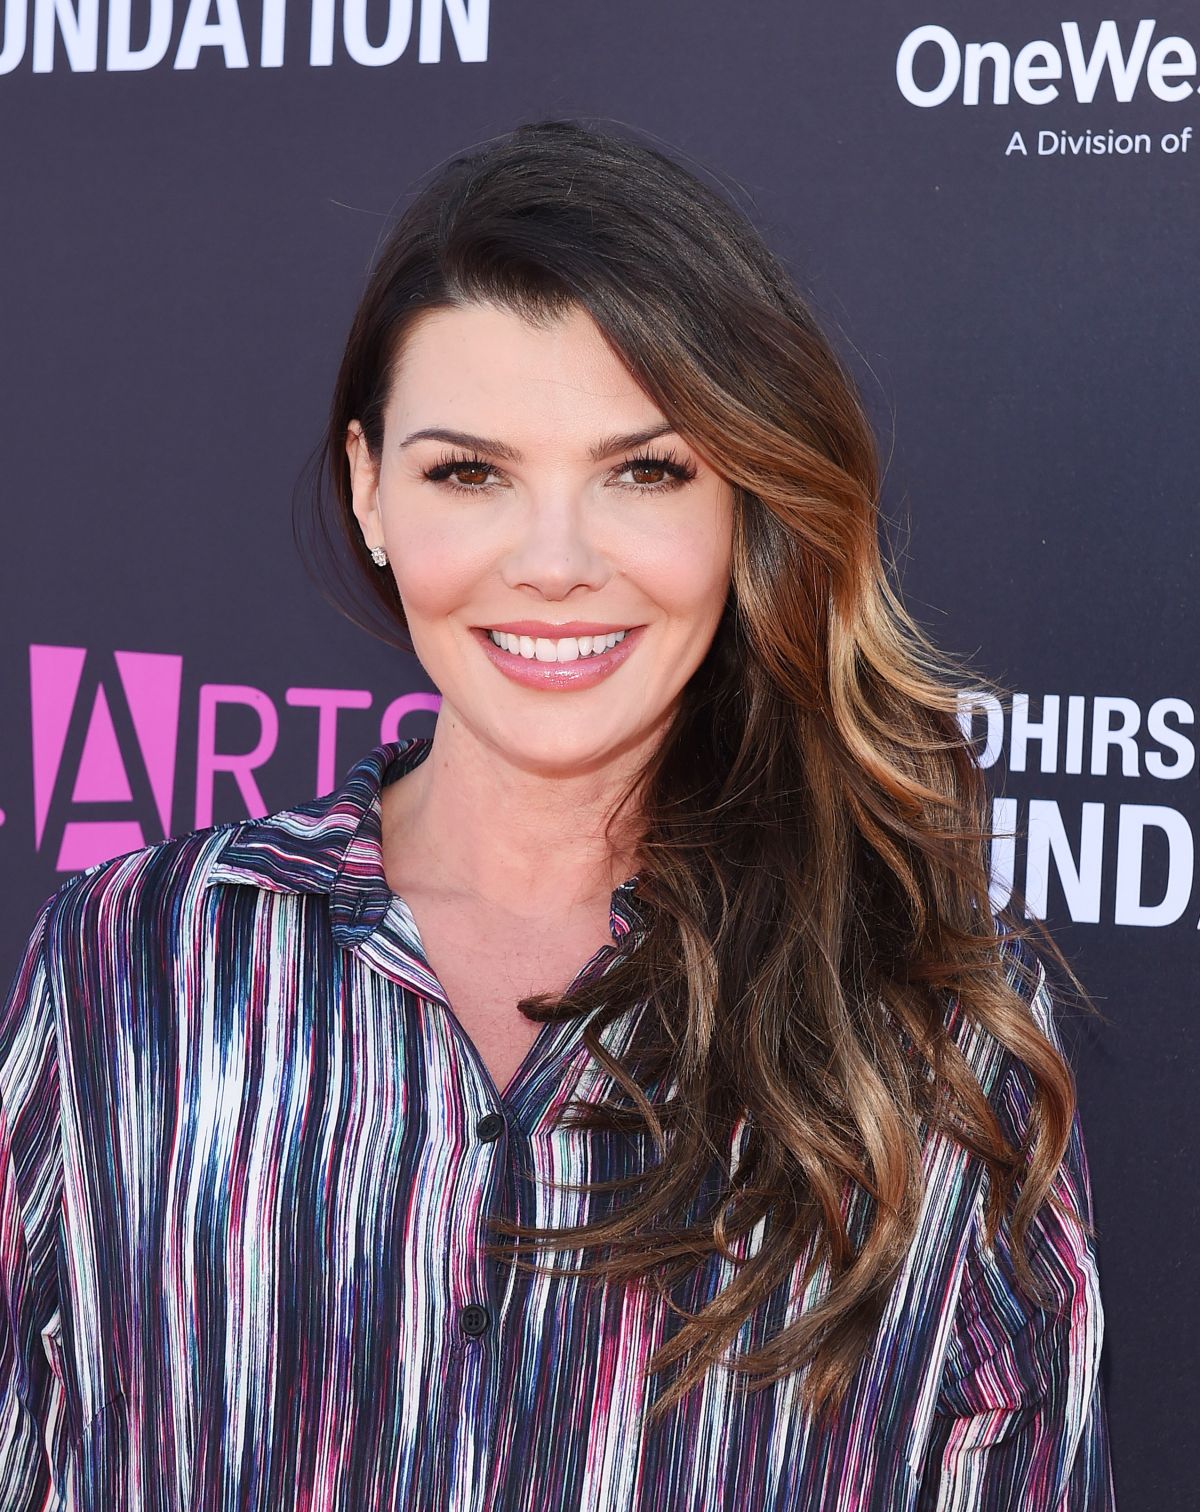 ALI LANDRY at P.S. Arts and Onewest Bank’s Express Yourself 2016 in Santa Monica 11/13/2016